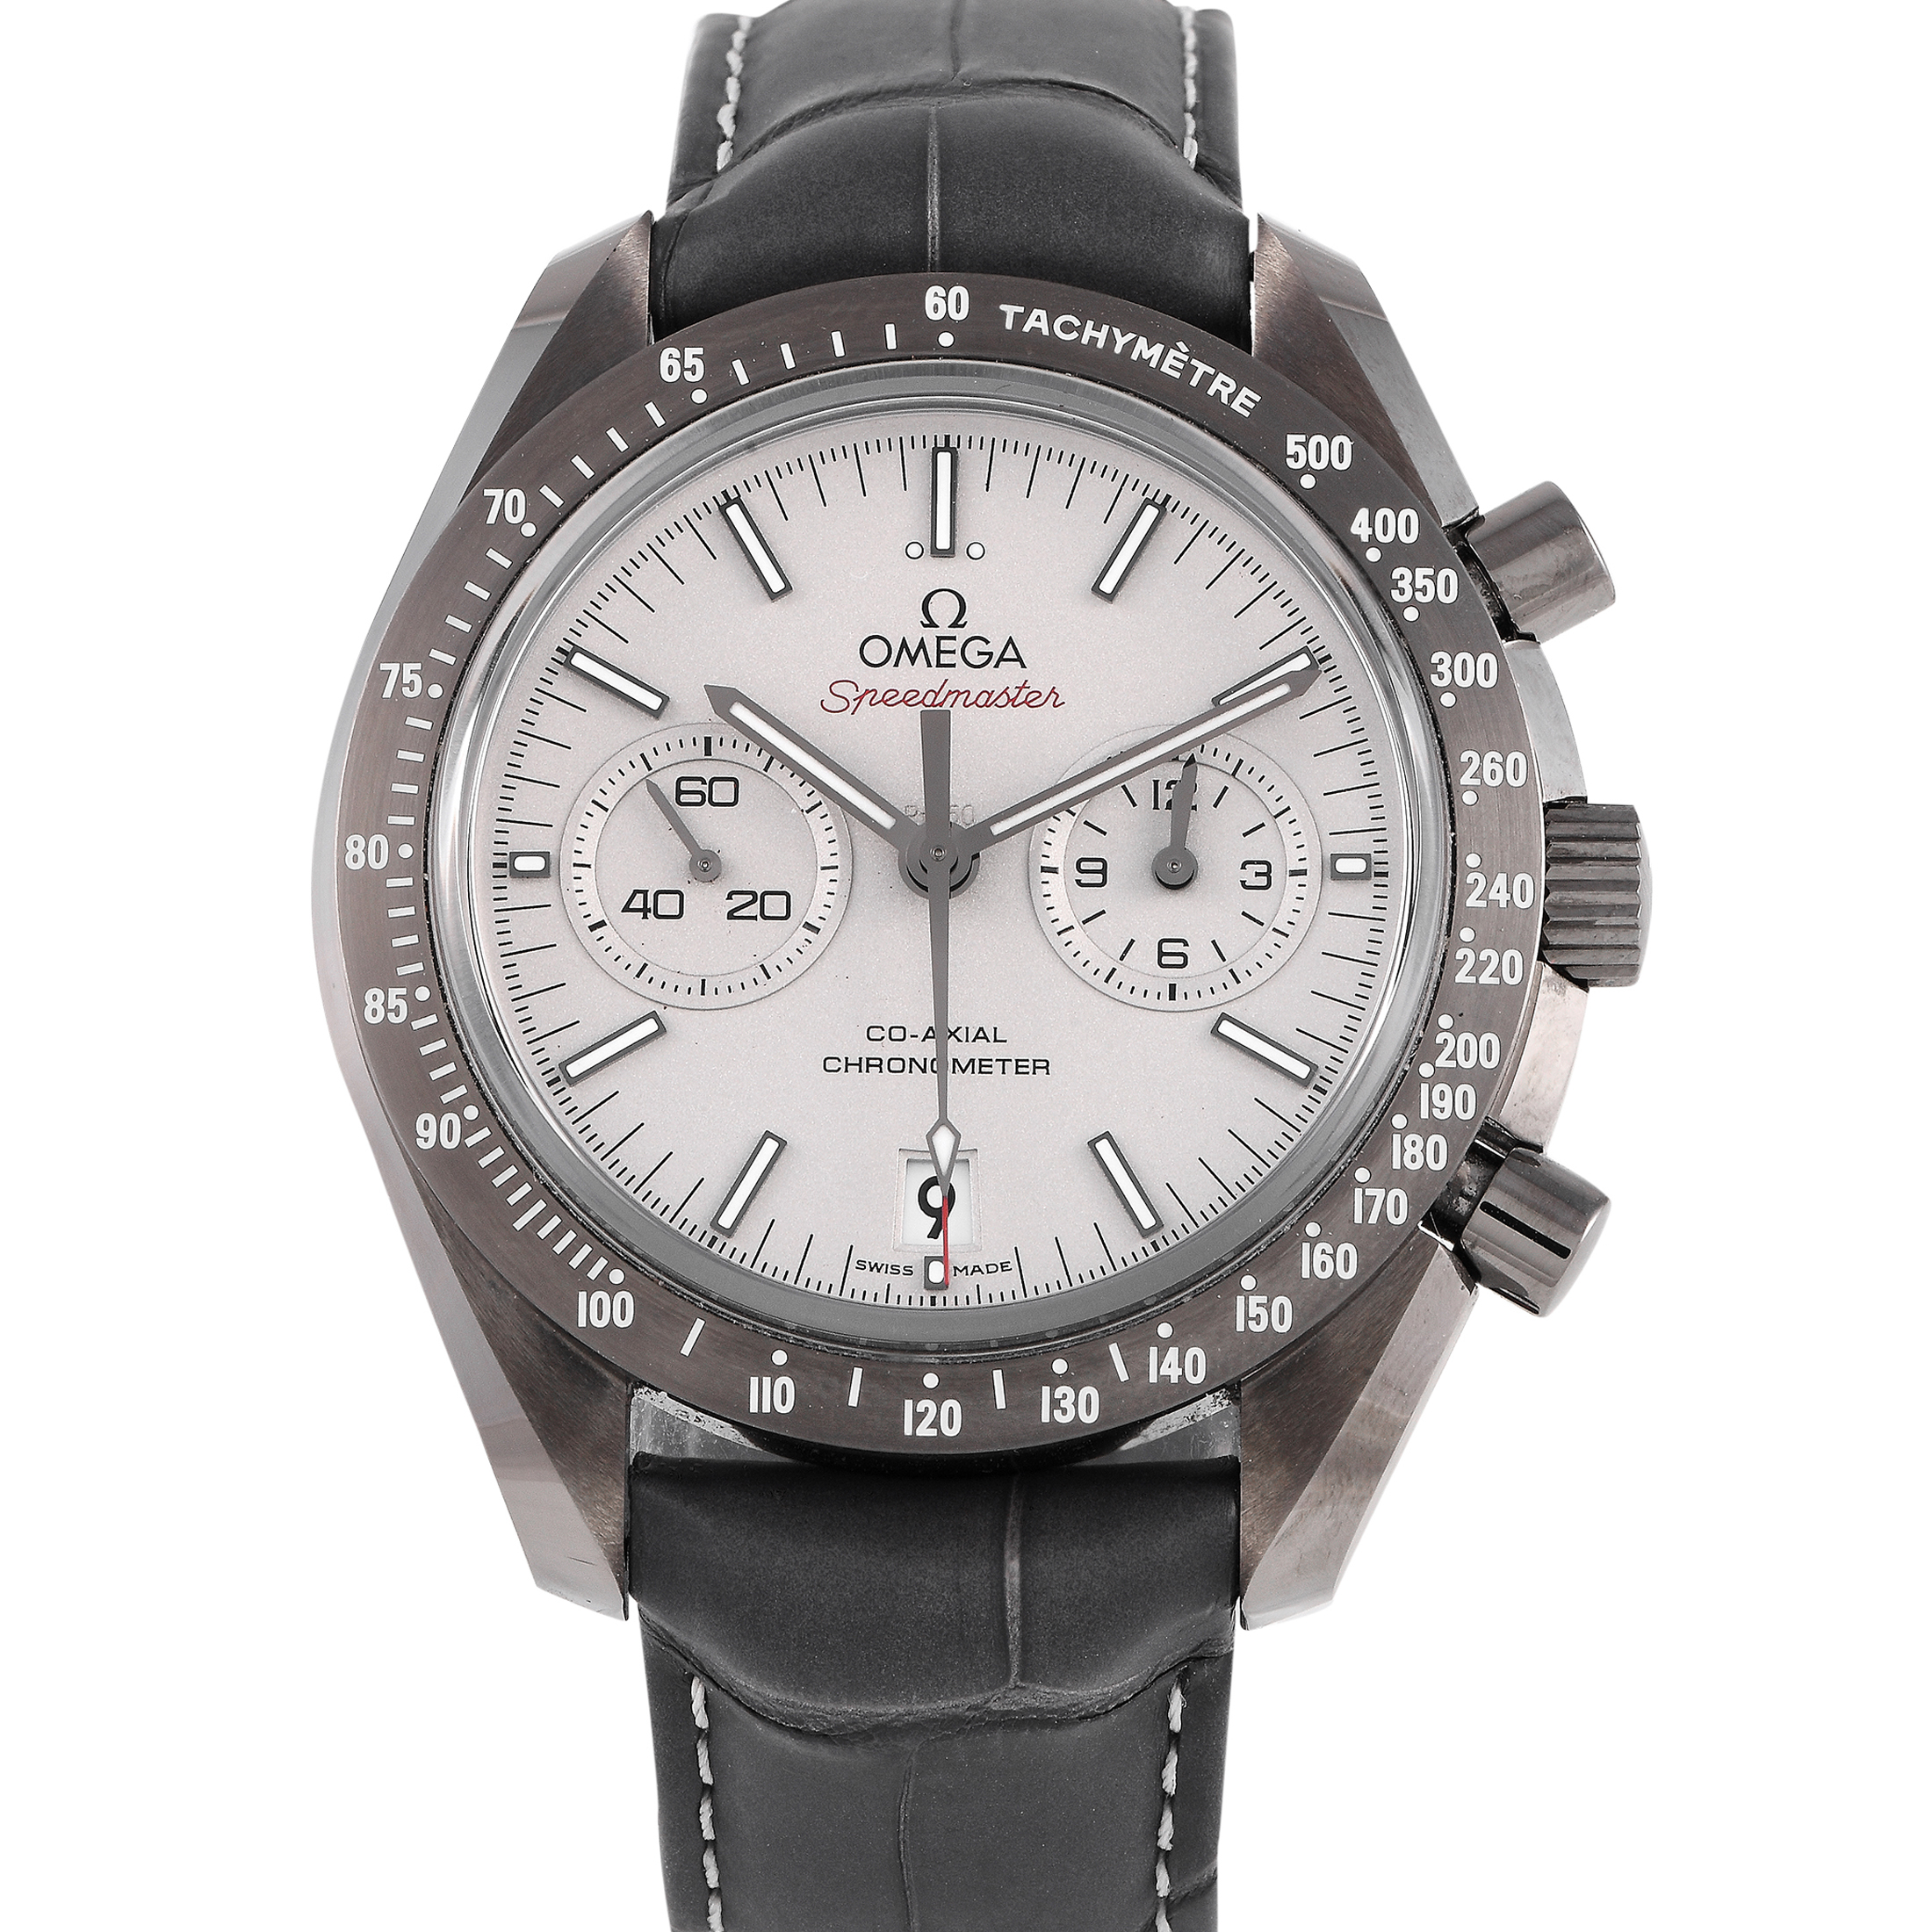 Omega Speedmaster Grey Side of the Moon Chronograph Watch 311.93.44.51.99.002